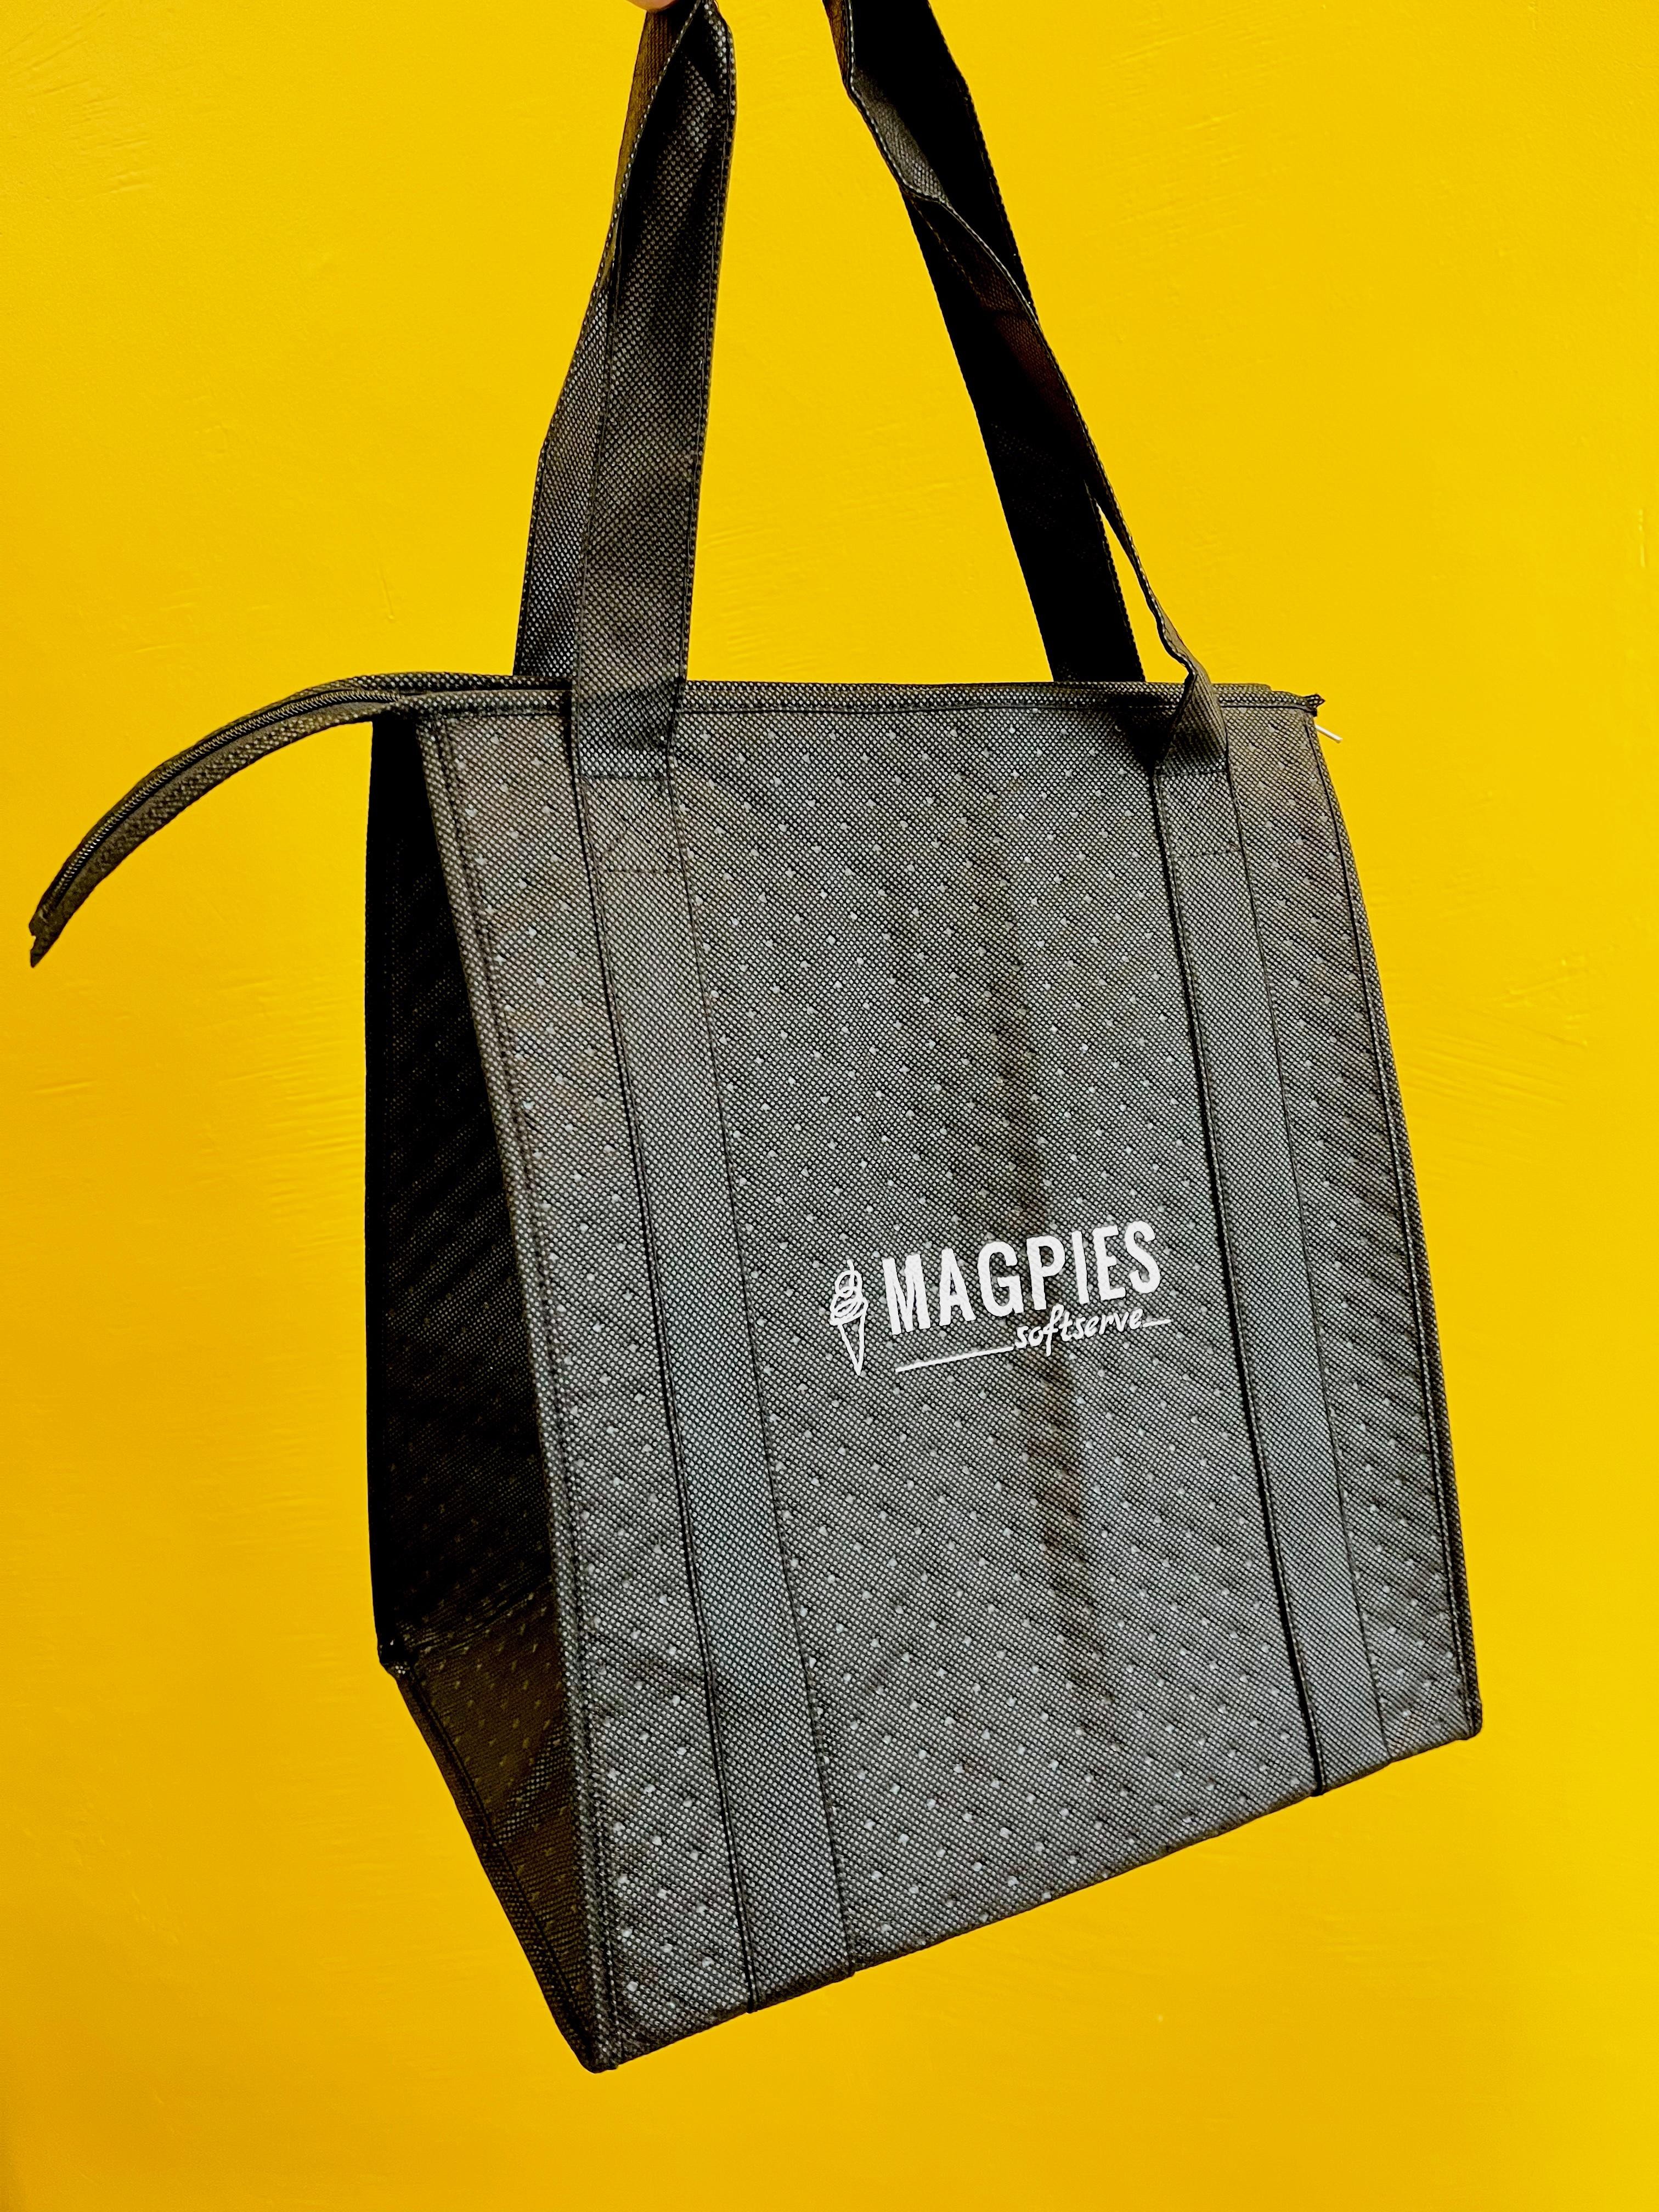 Magpies Insulated Tote with Ice Pack (Fits a maximum of 2 whole pies)